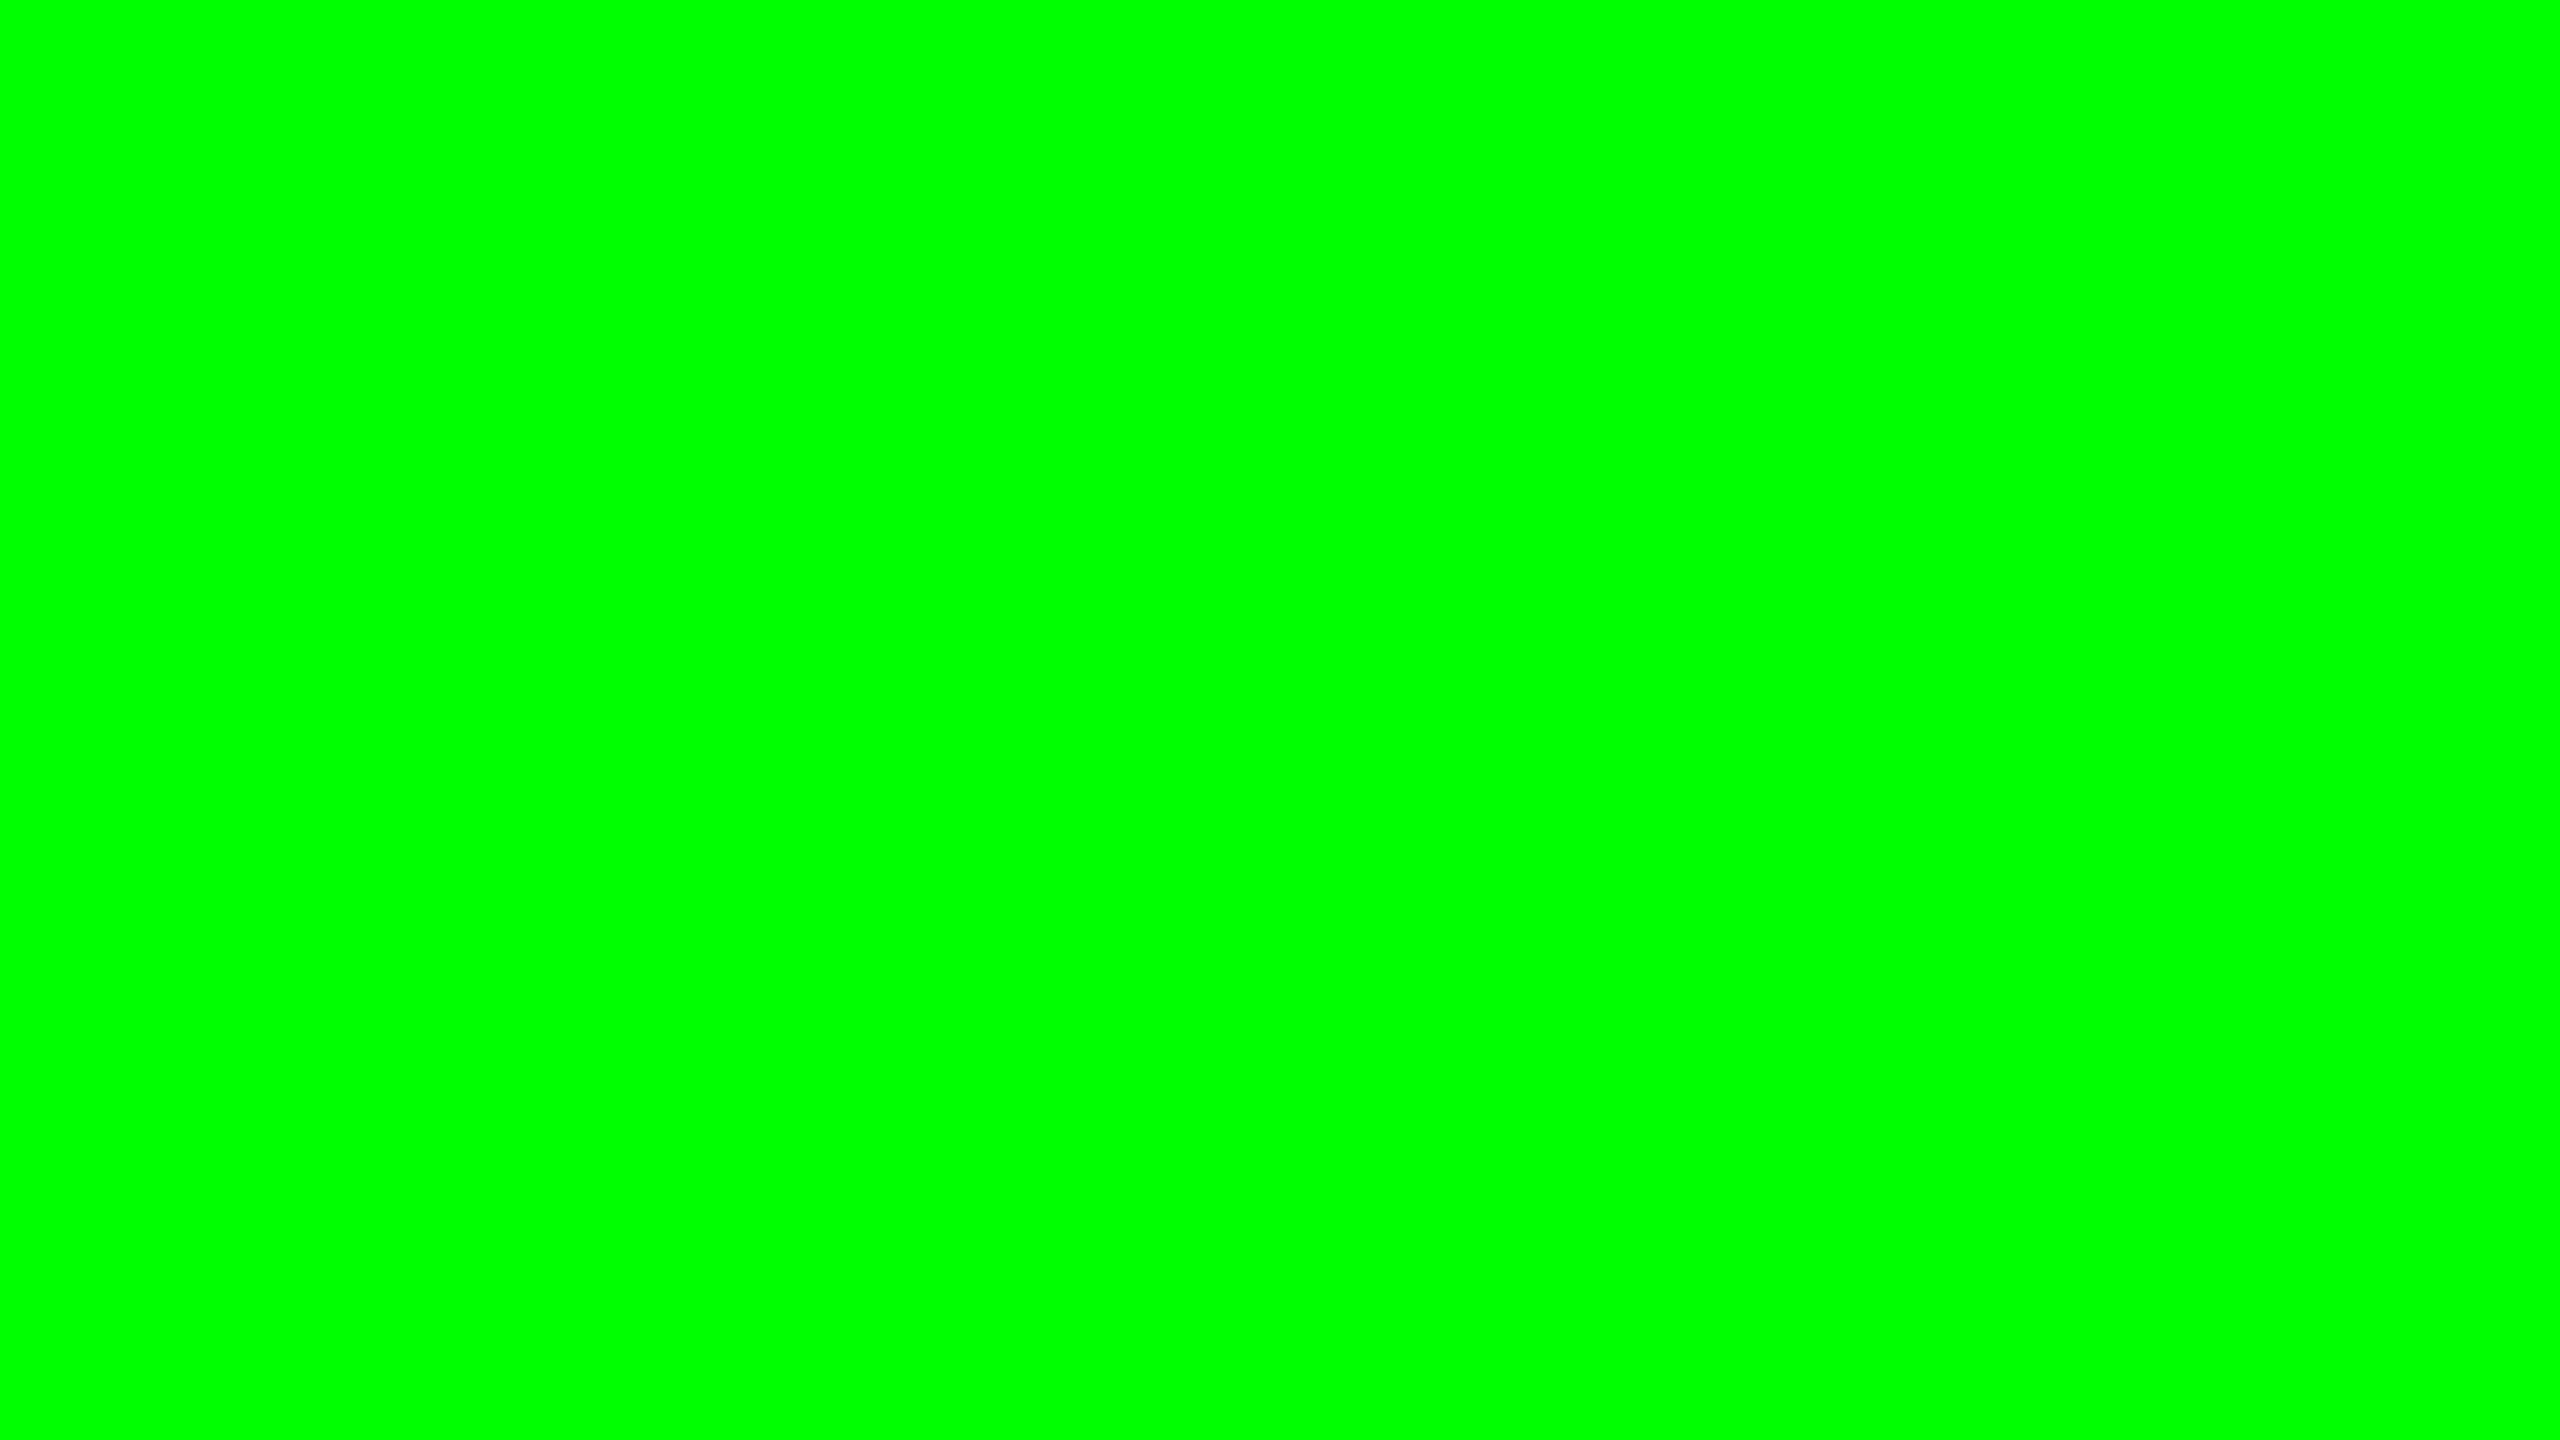 2560x1440 Green X11 Gui Green Solid Color Background